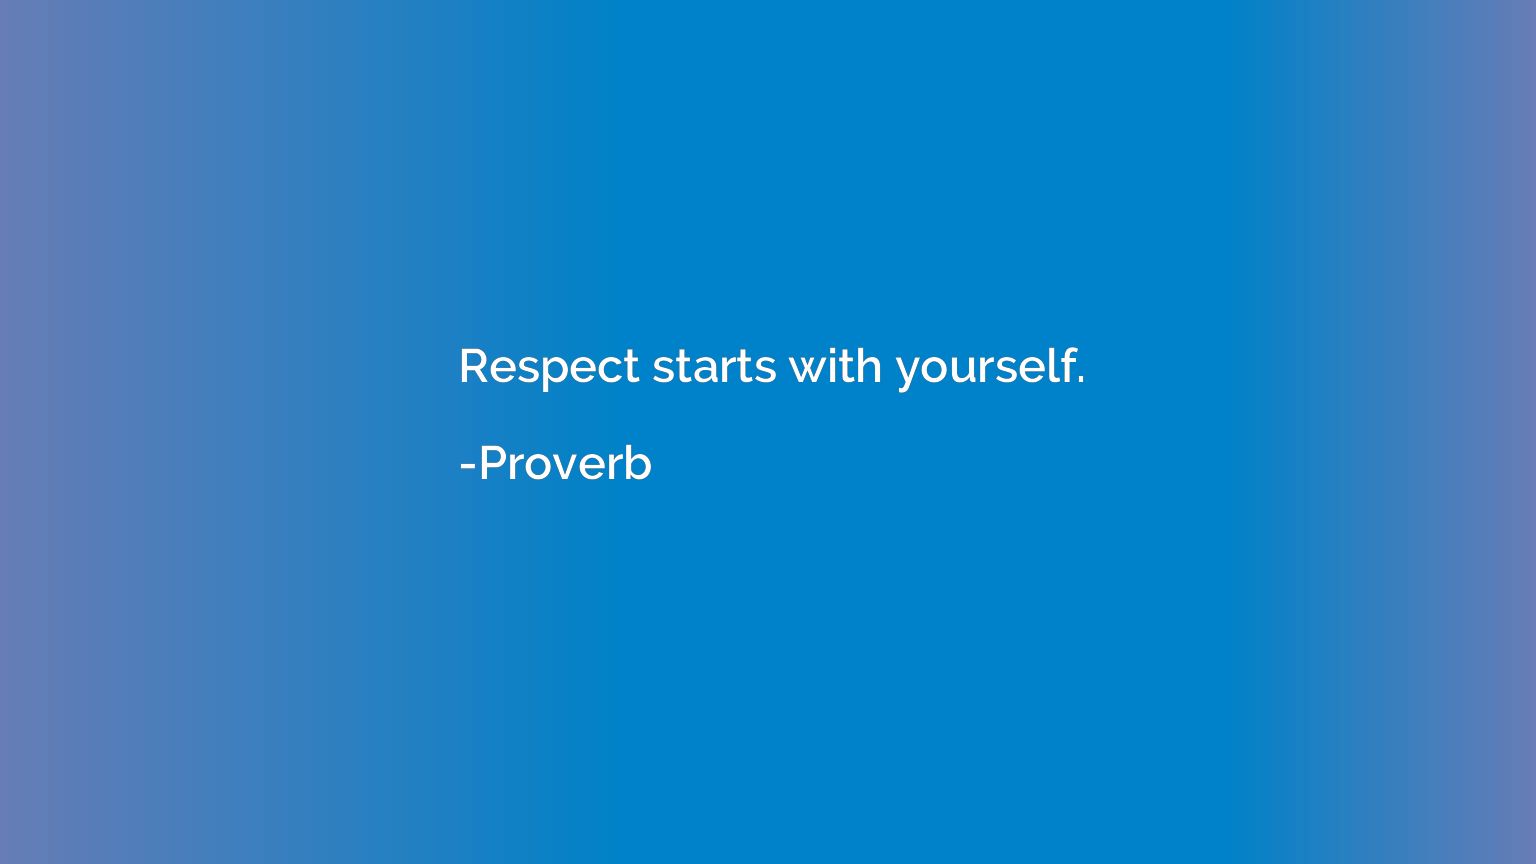 Respect starts with yourself.